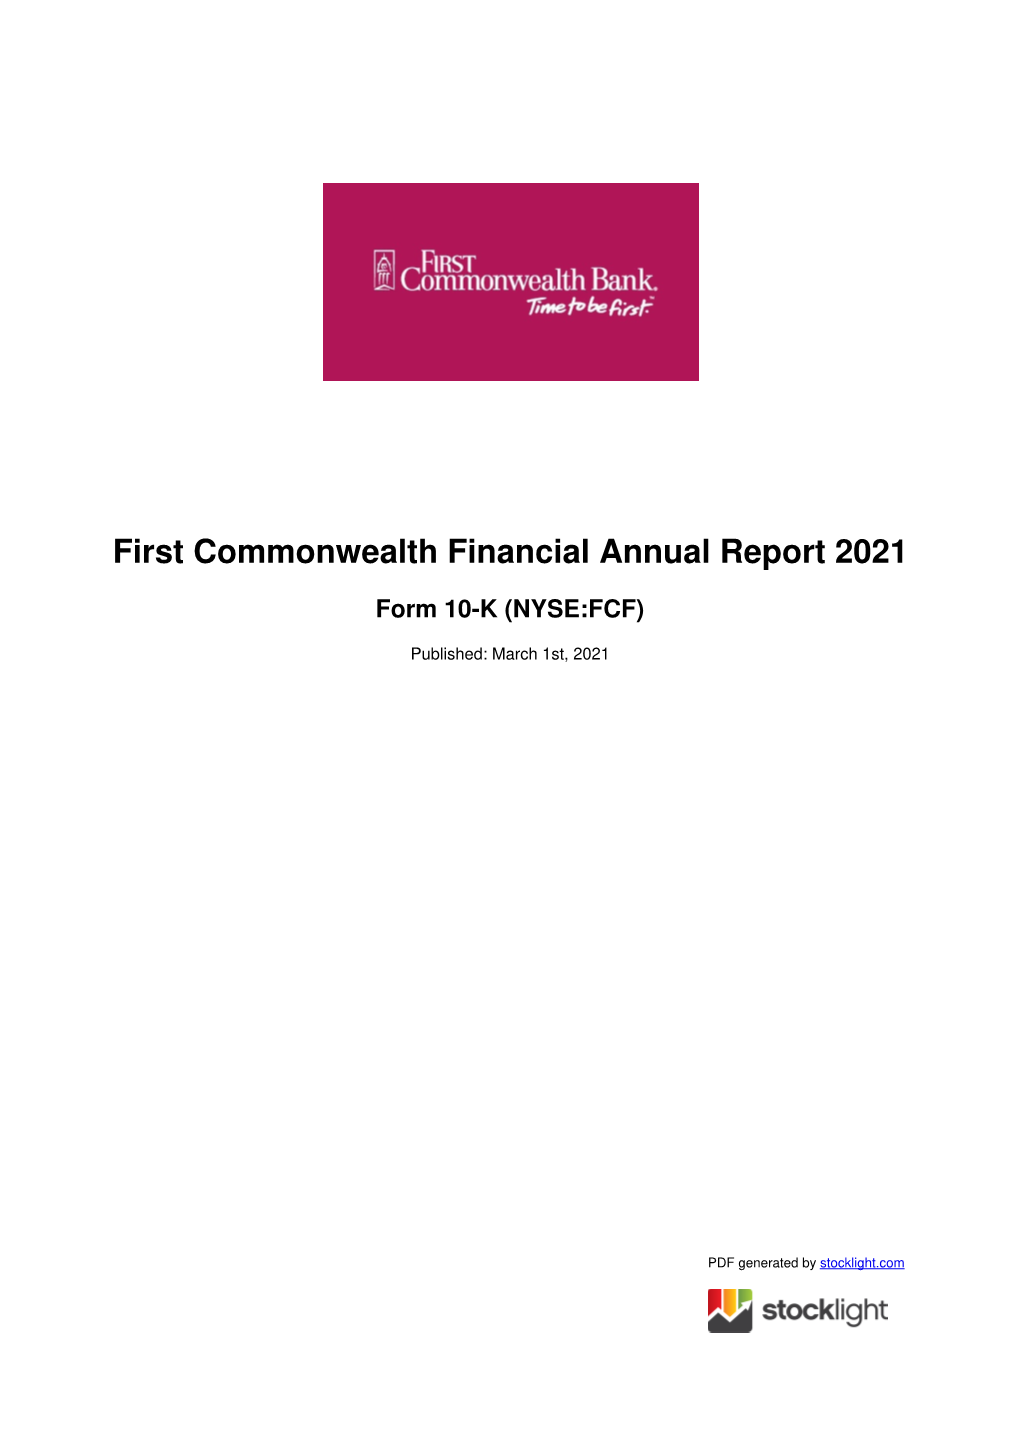 First Commonwealth Financial Annual Report 2021